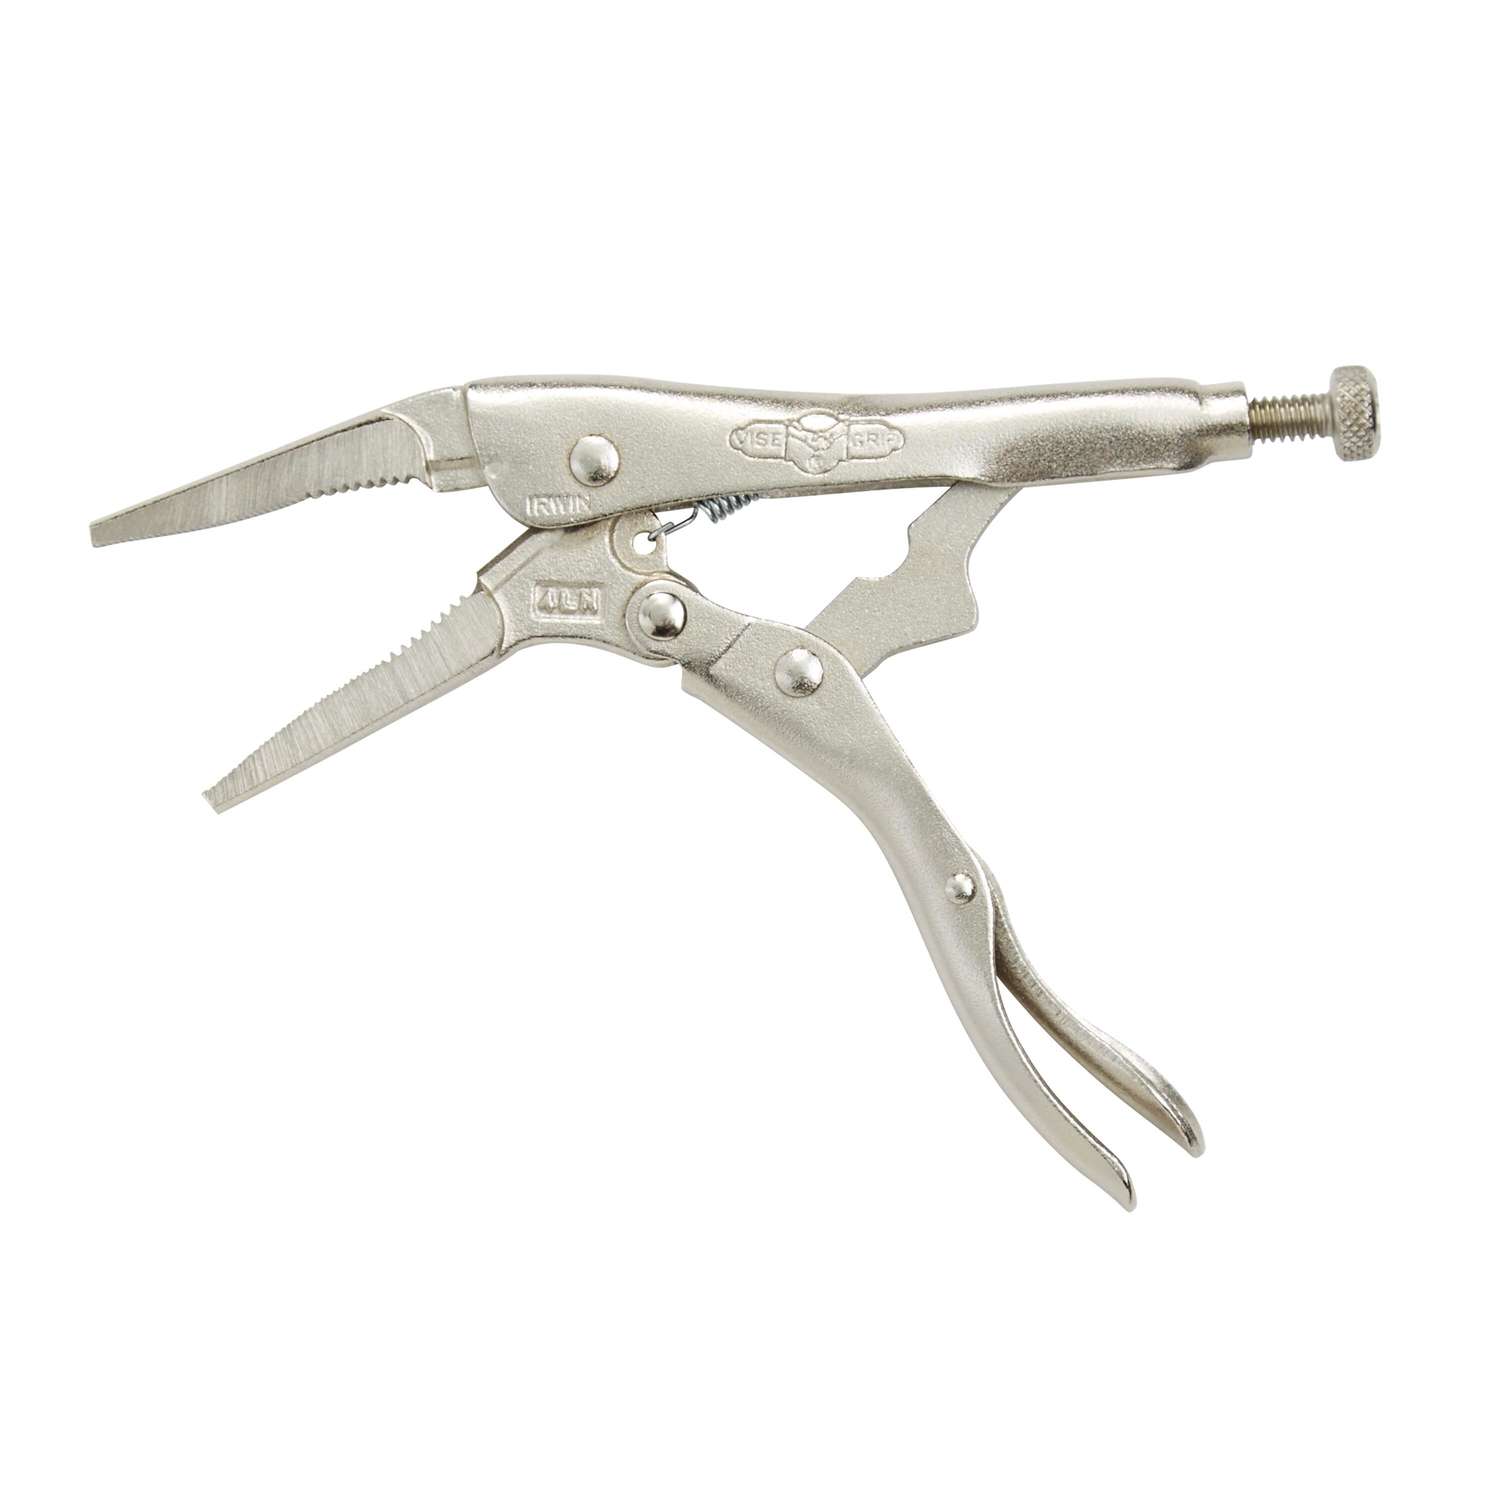 1 Pc Mini Vice Grip Style Locking Pliers 5 Long Needle Nose (CHEAPEST ON  )